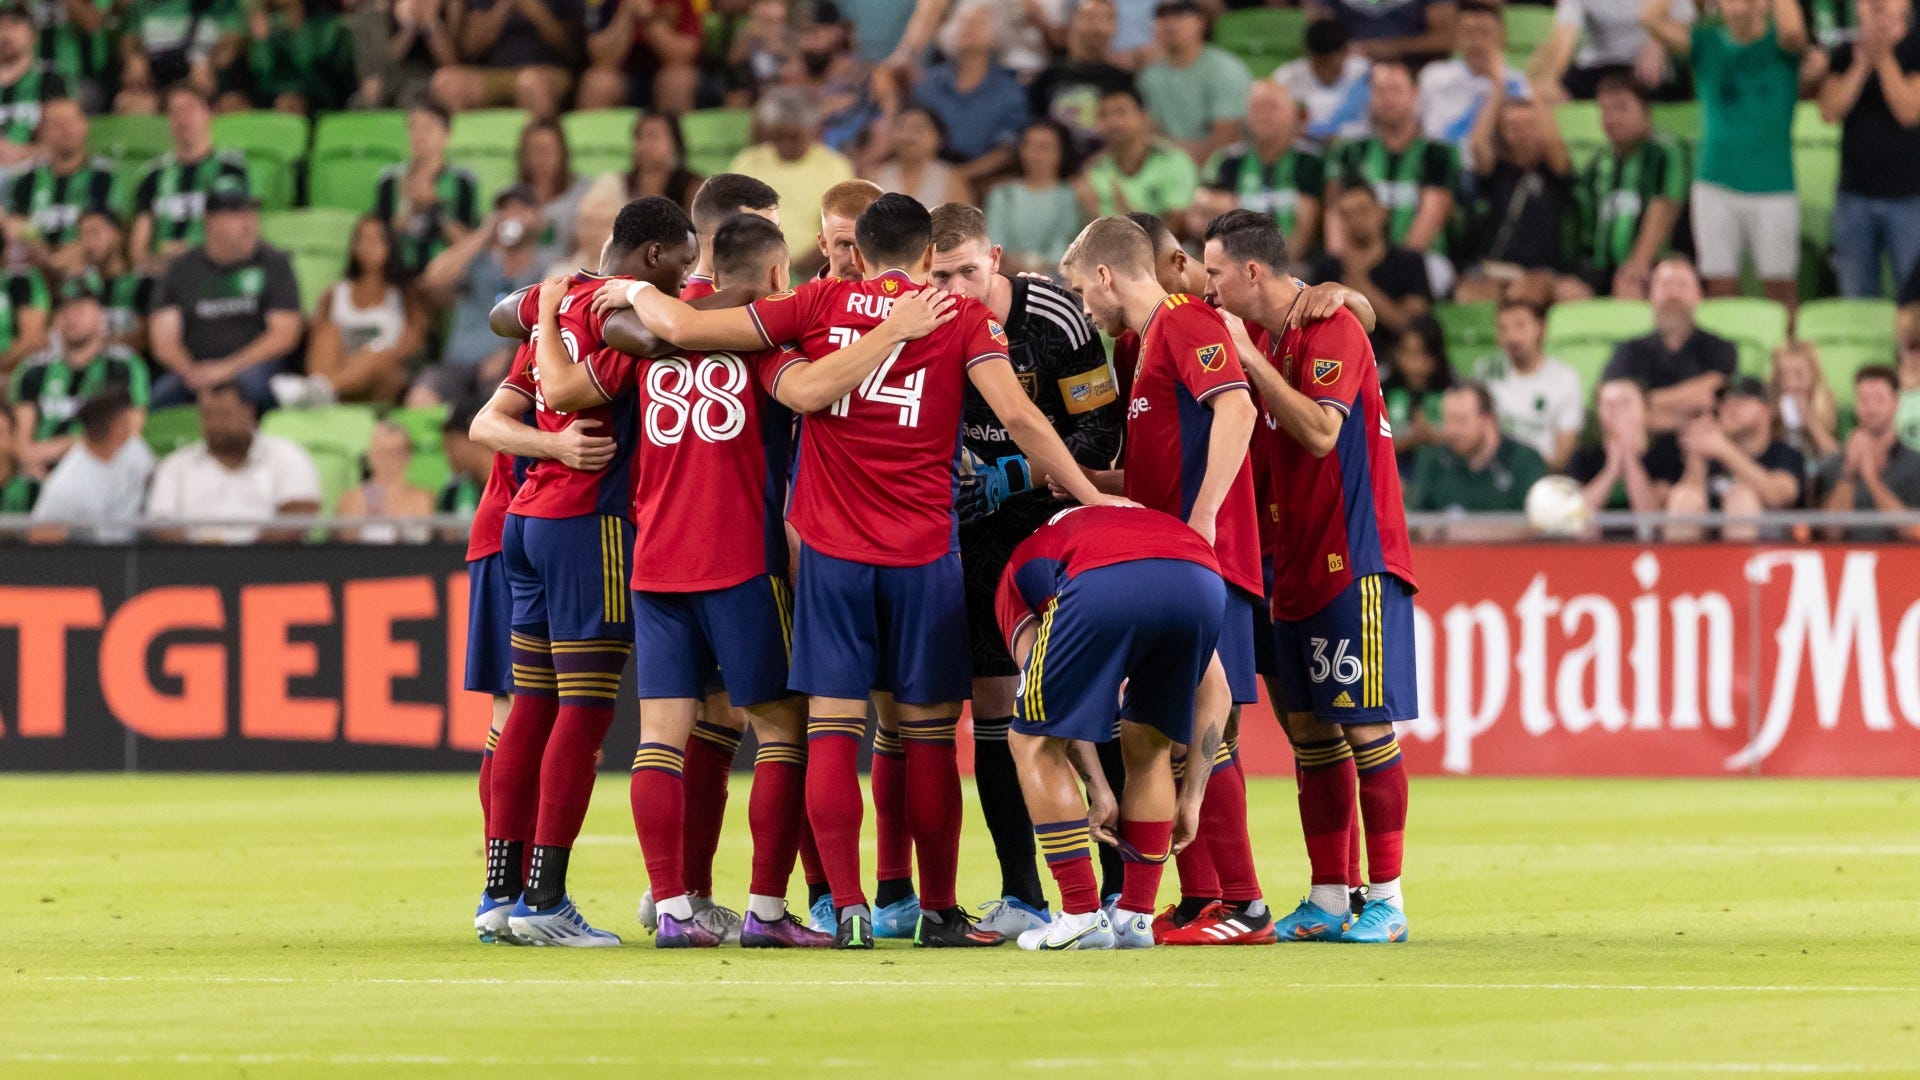 Austin FC vs Real Salt Lake Live stream, TV channel, kick-off time and how to watch Goal US